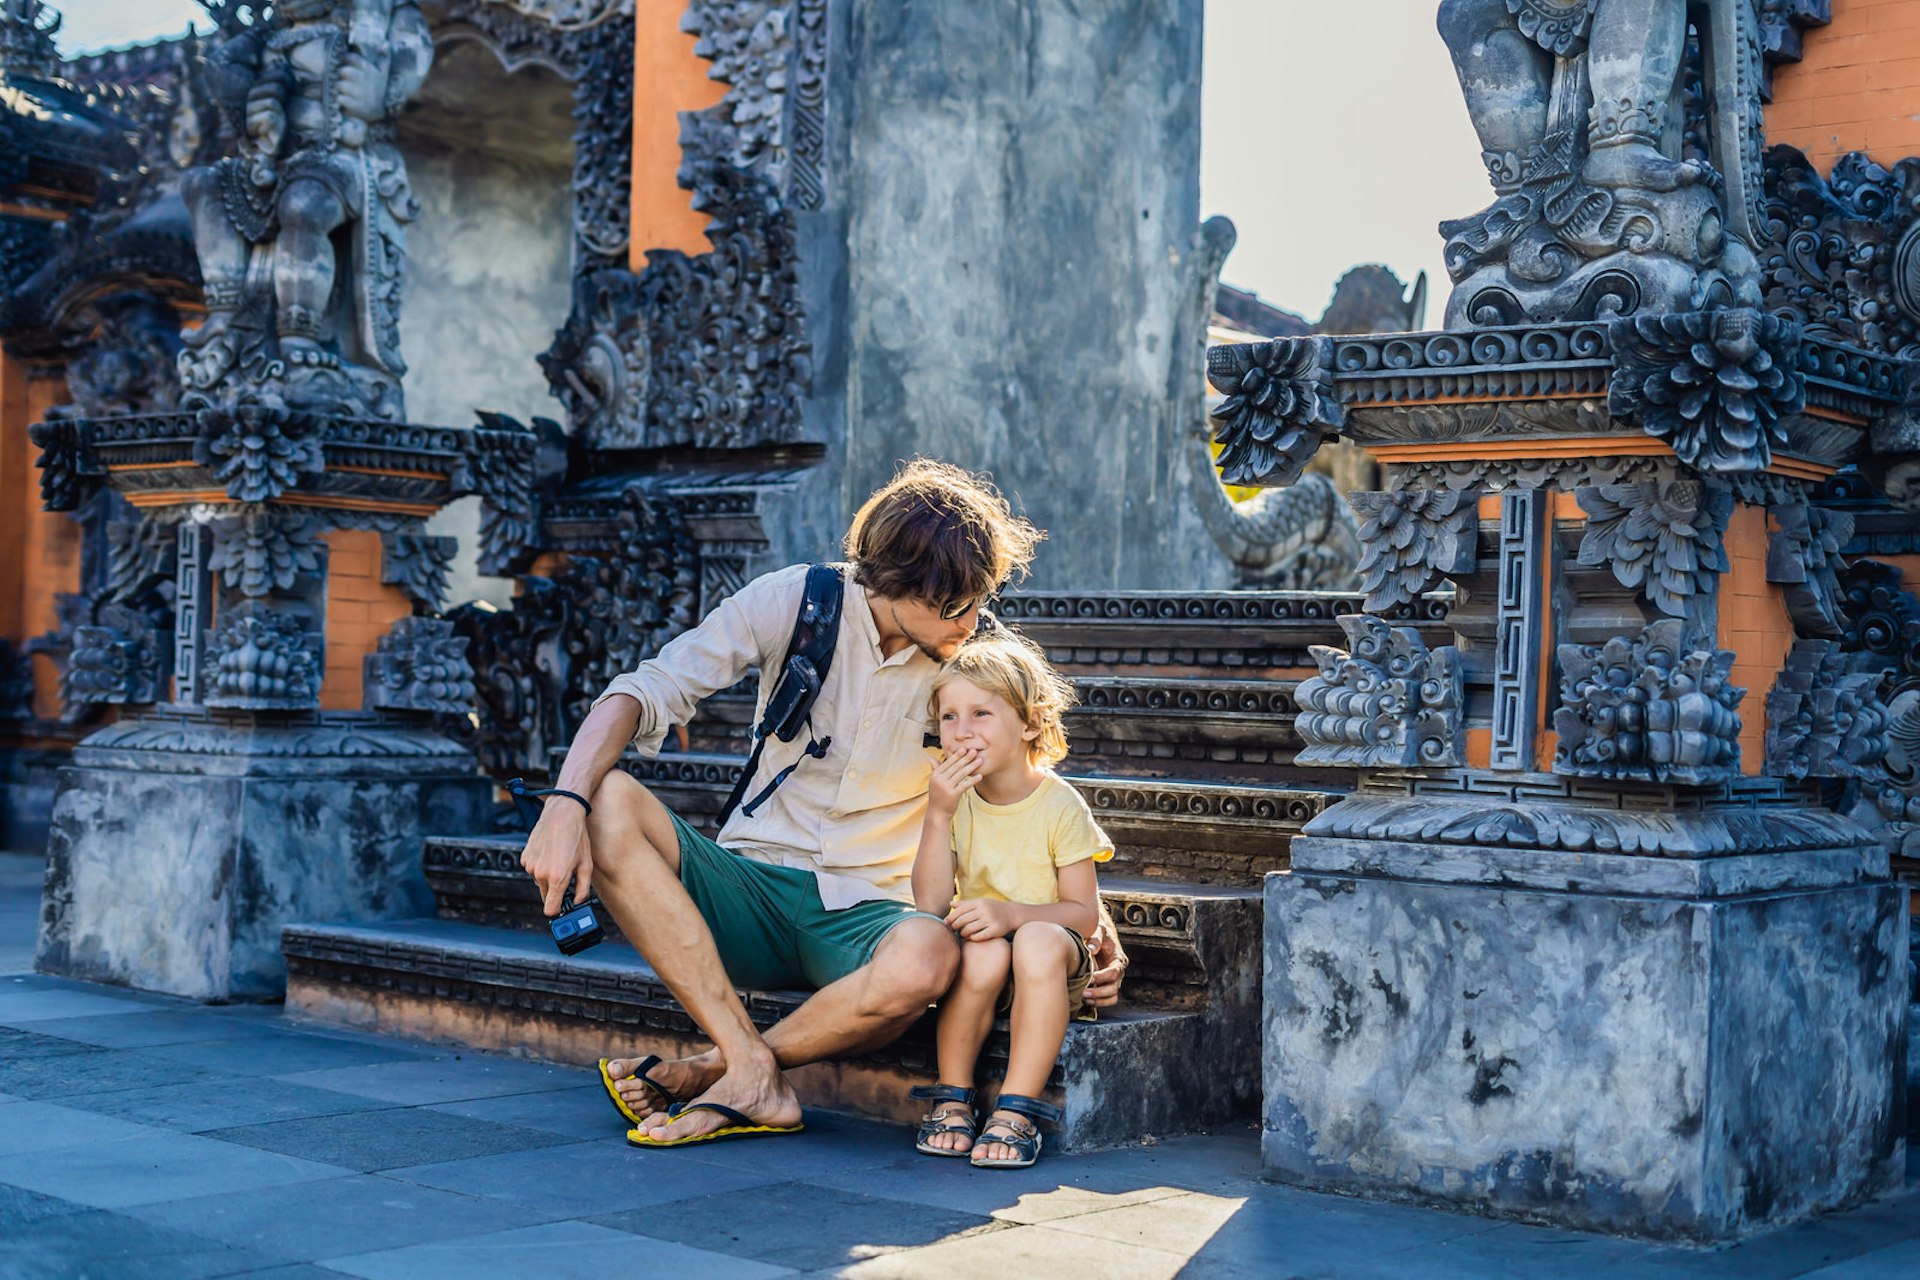 A father an son enjoy an affordable family vacation, on the steps of a temple Bali